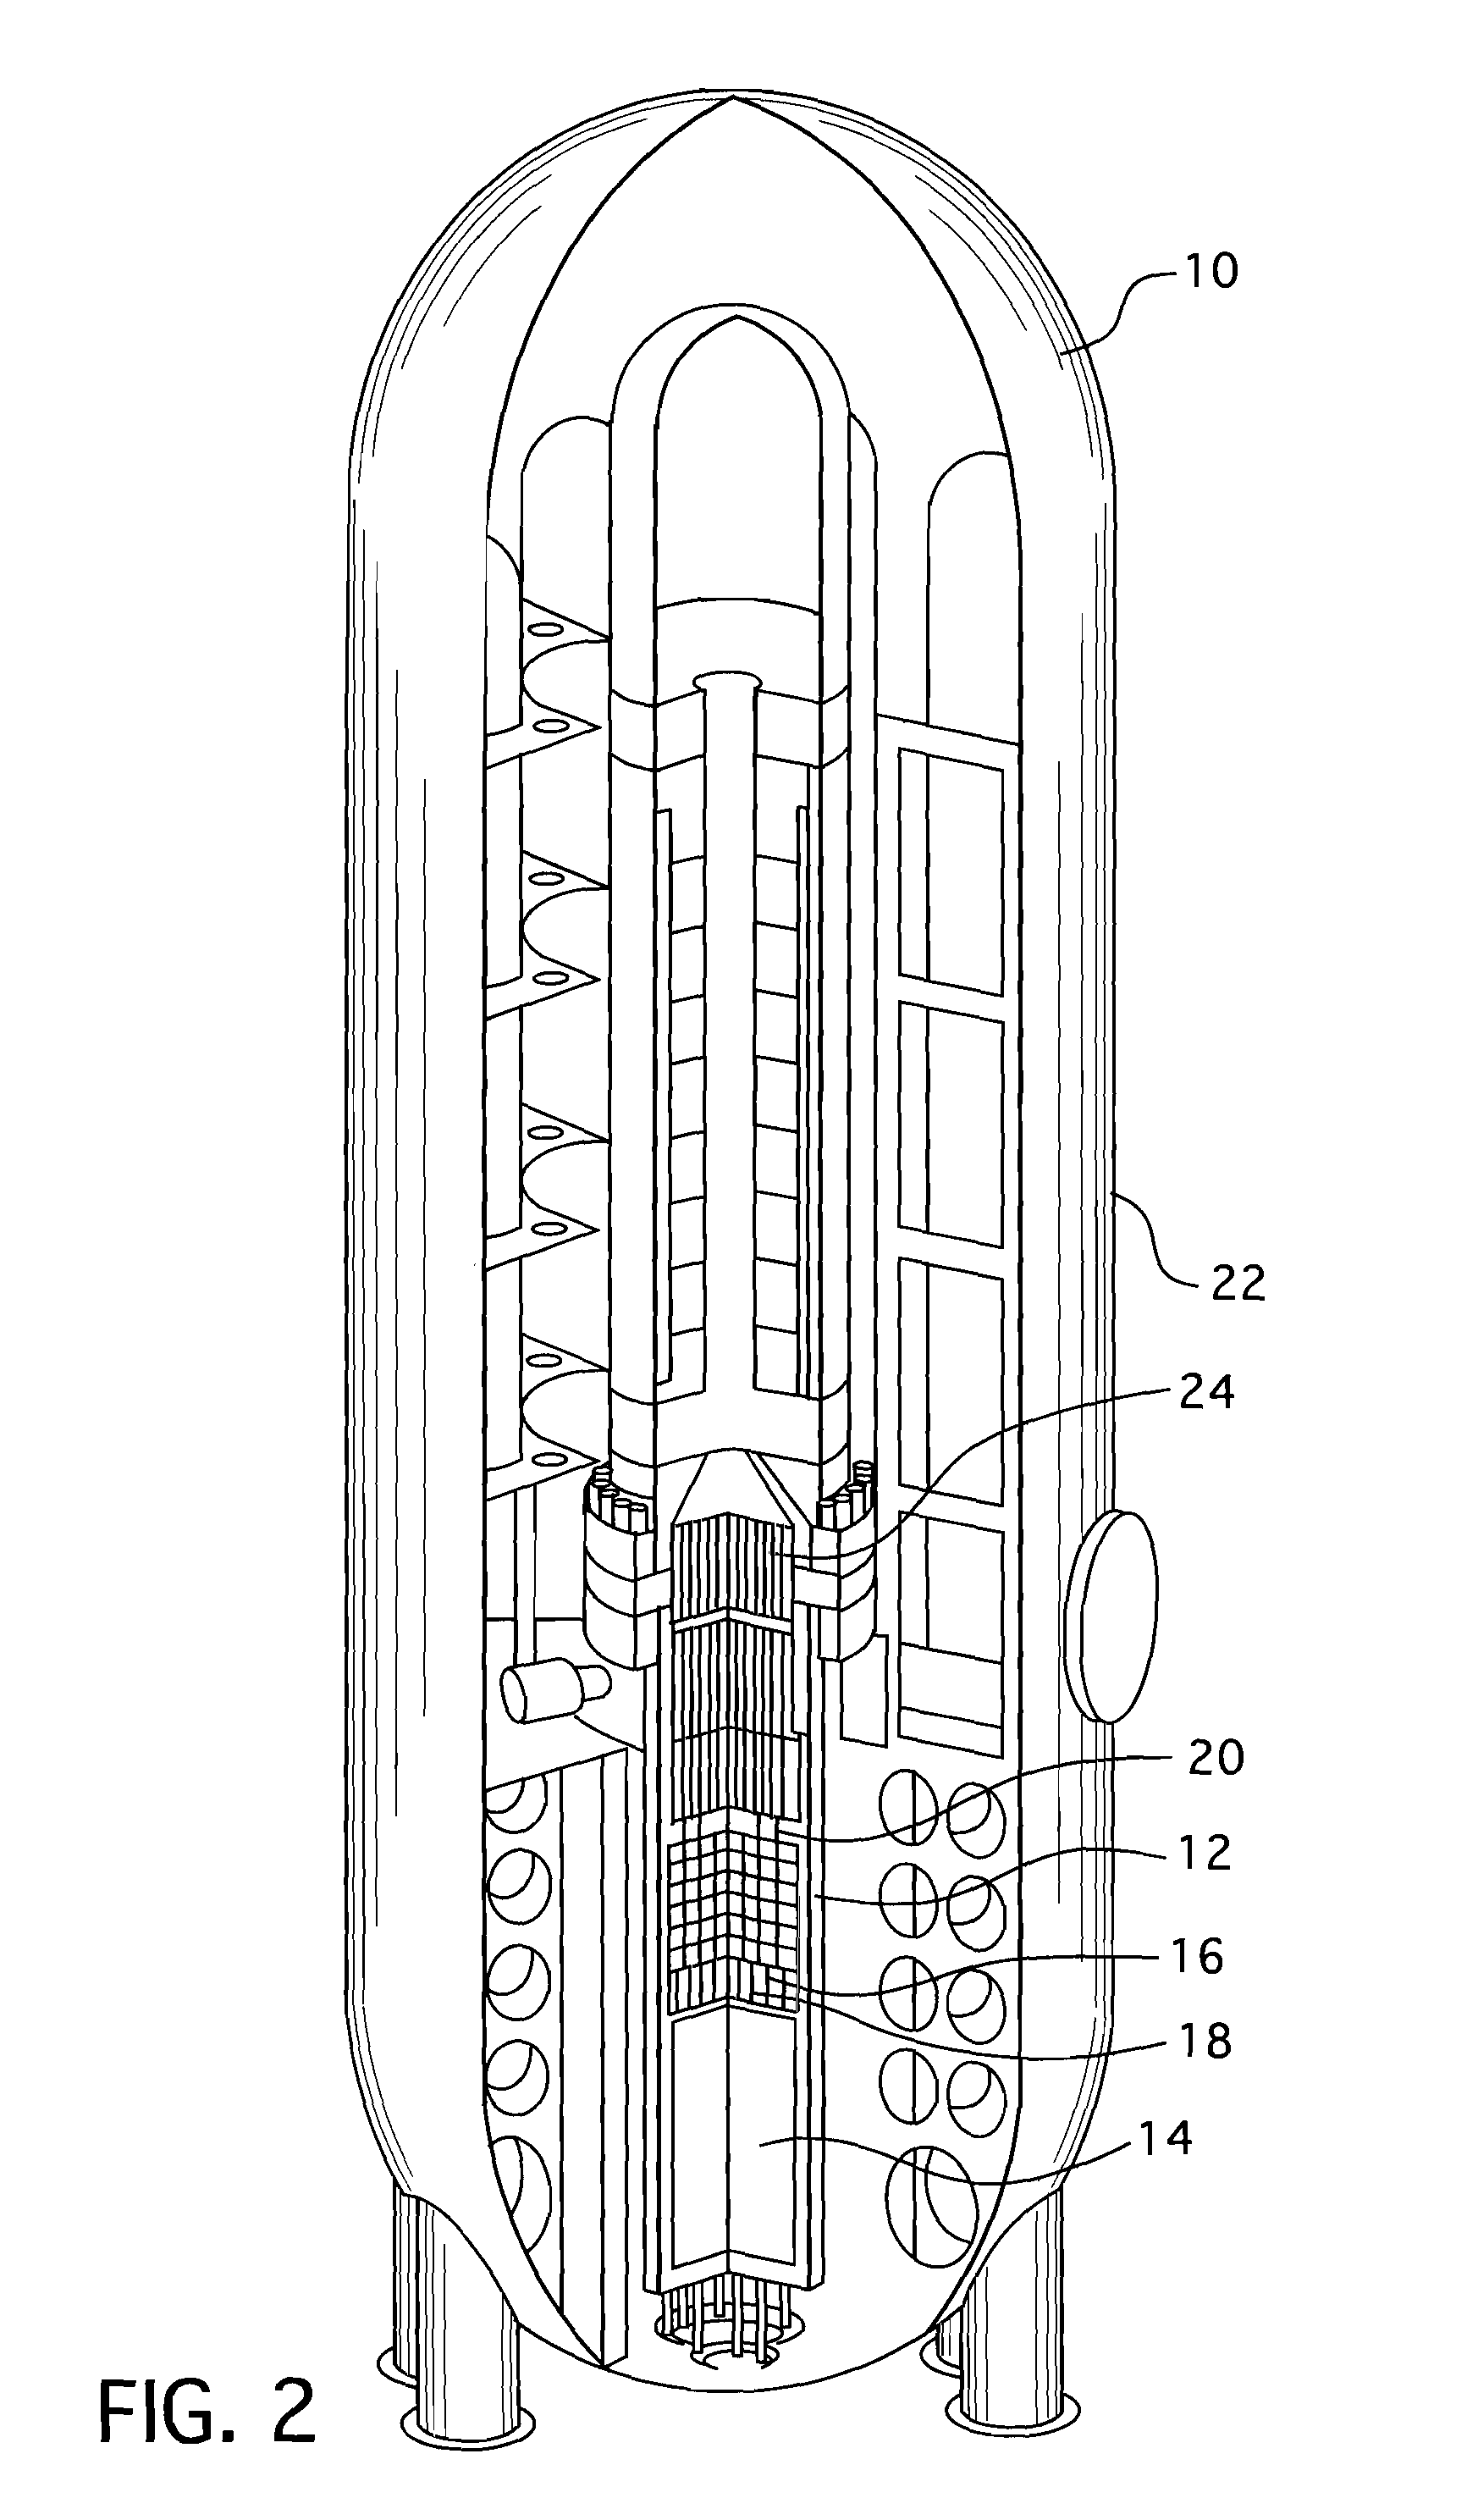 Nuclear reactor internal electric control rod drive mechanism assembly